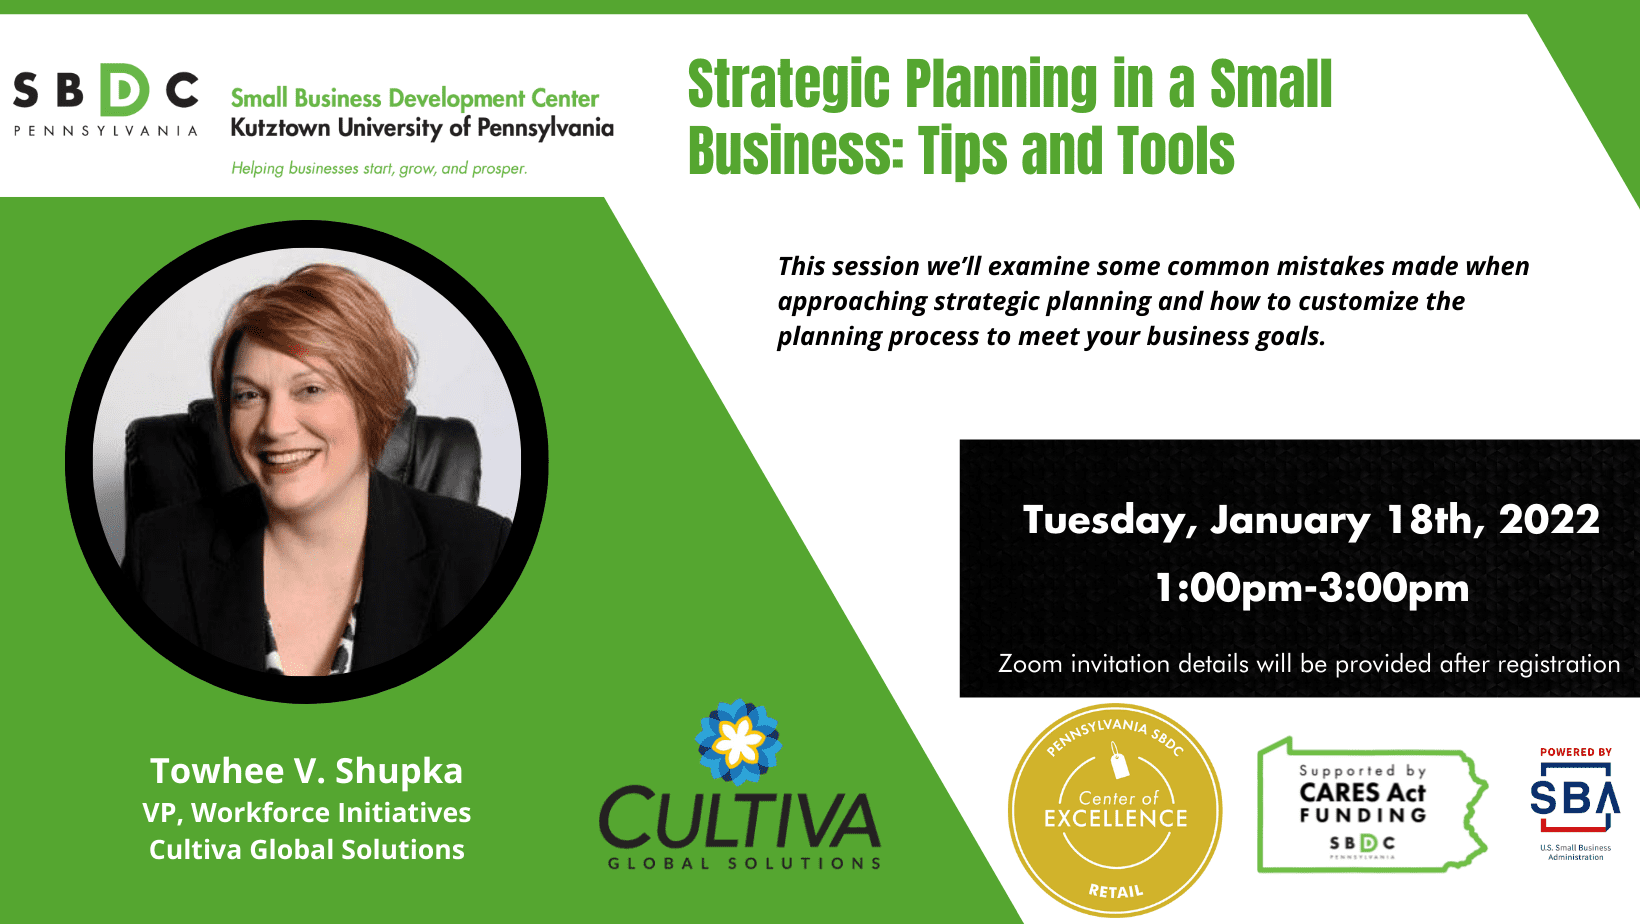 Strategic Planning in a Small Business: Tips and Tools